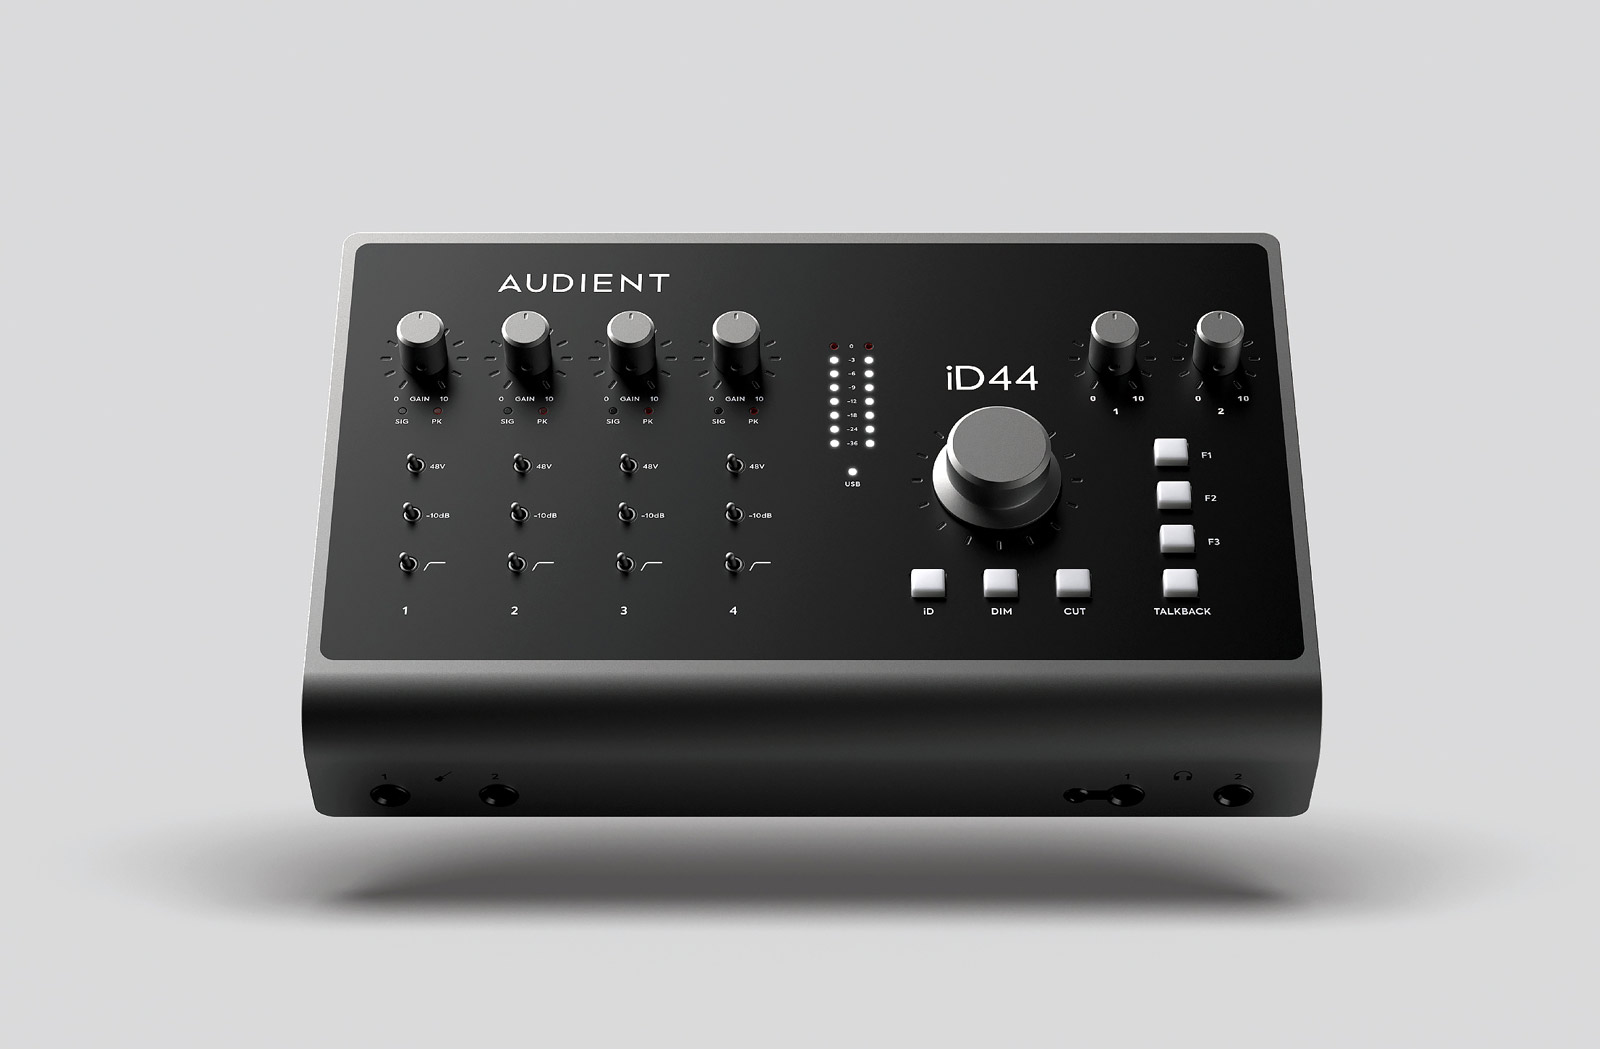 20in　iD44mkII　AUDIENT　インターフェイス-　24out　オーディオ